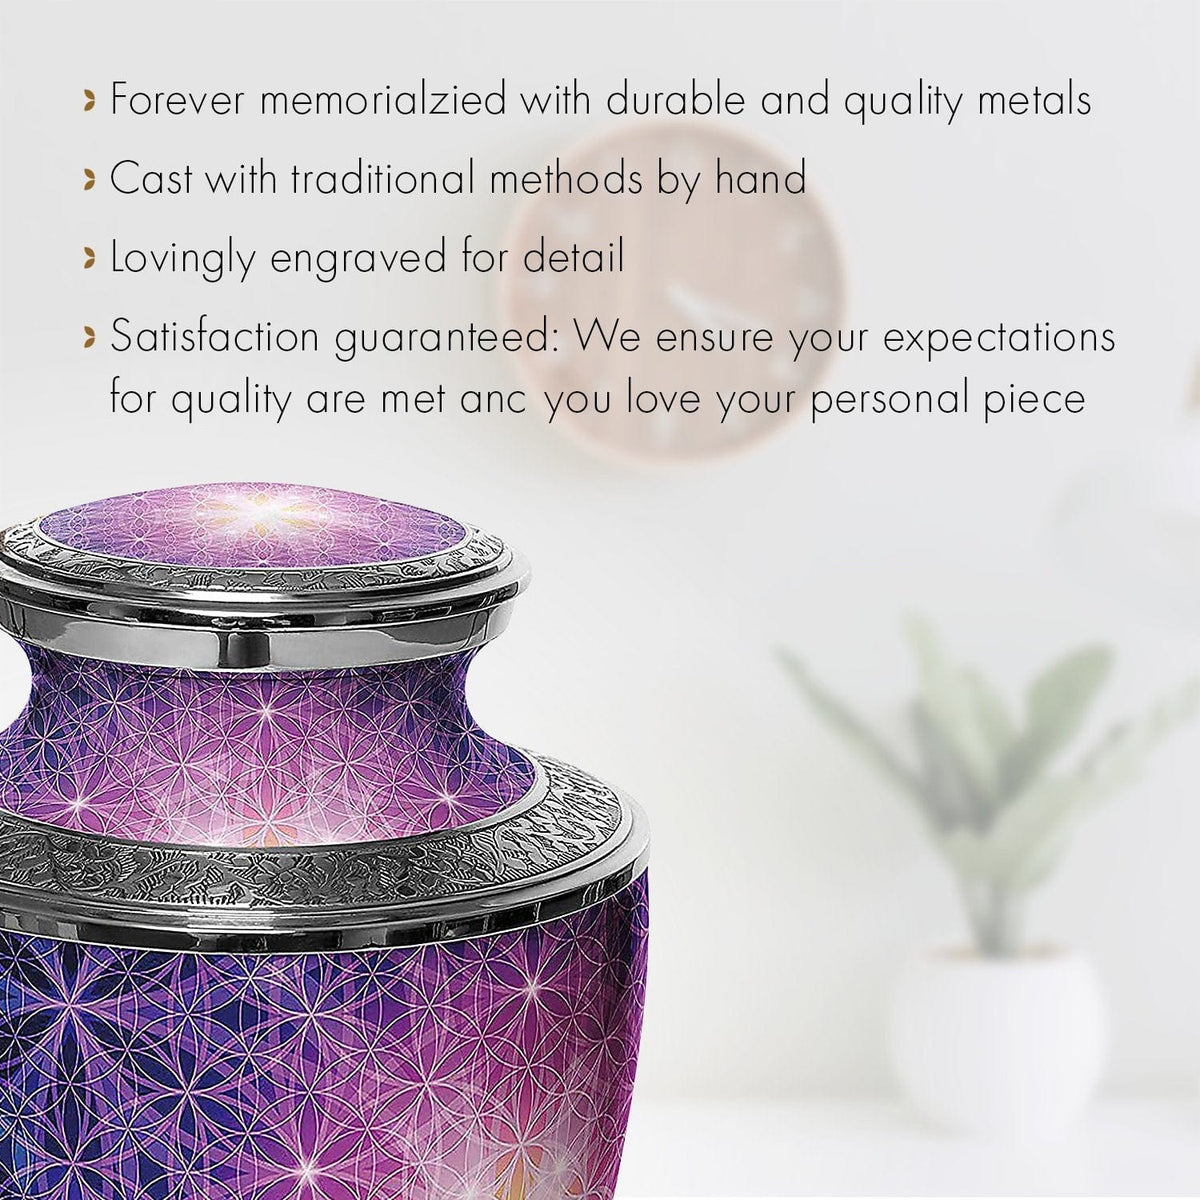 Commemorative Cremation Urns Home &amp; Garden Seed of Life Geometric Cremation Urn